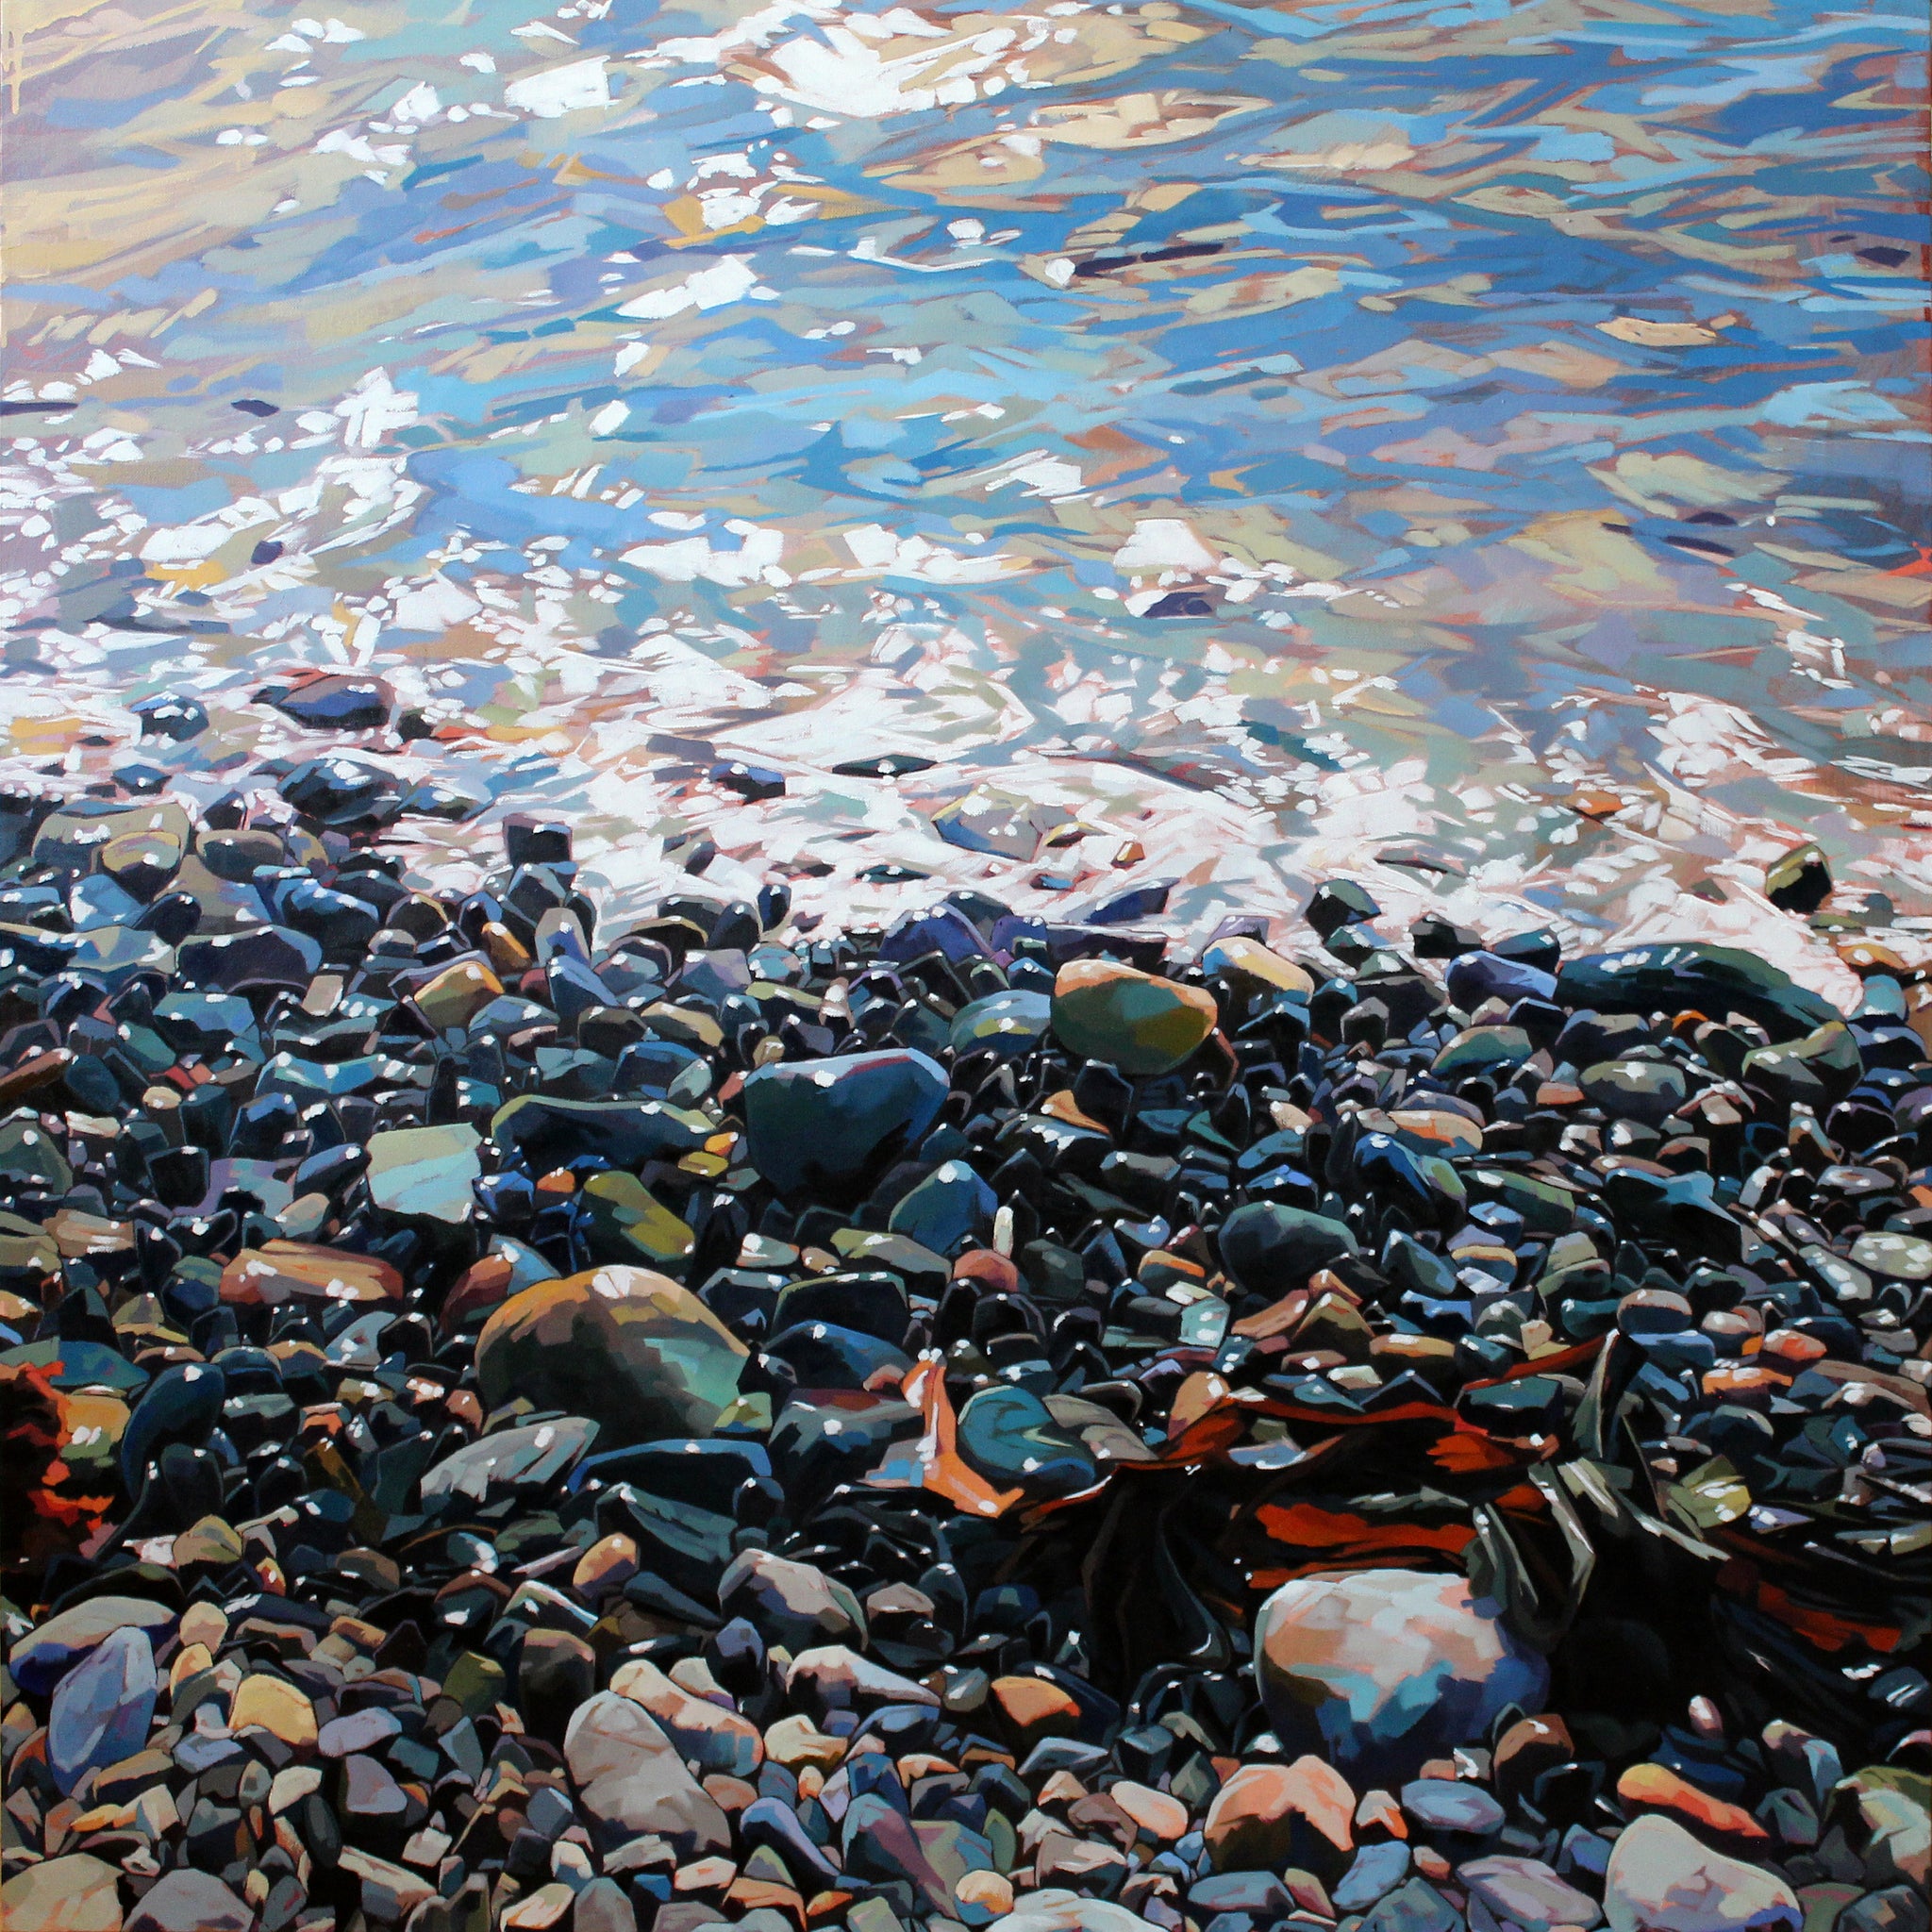 Pebbles - Contemporary art from Ireland. Paintings & prints by Irish seascape & landscape artist Kevin Lowery.